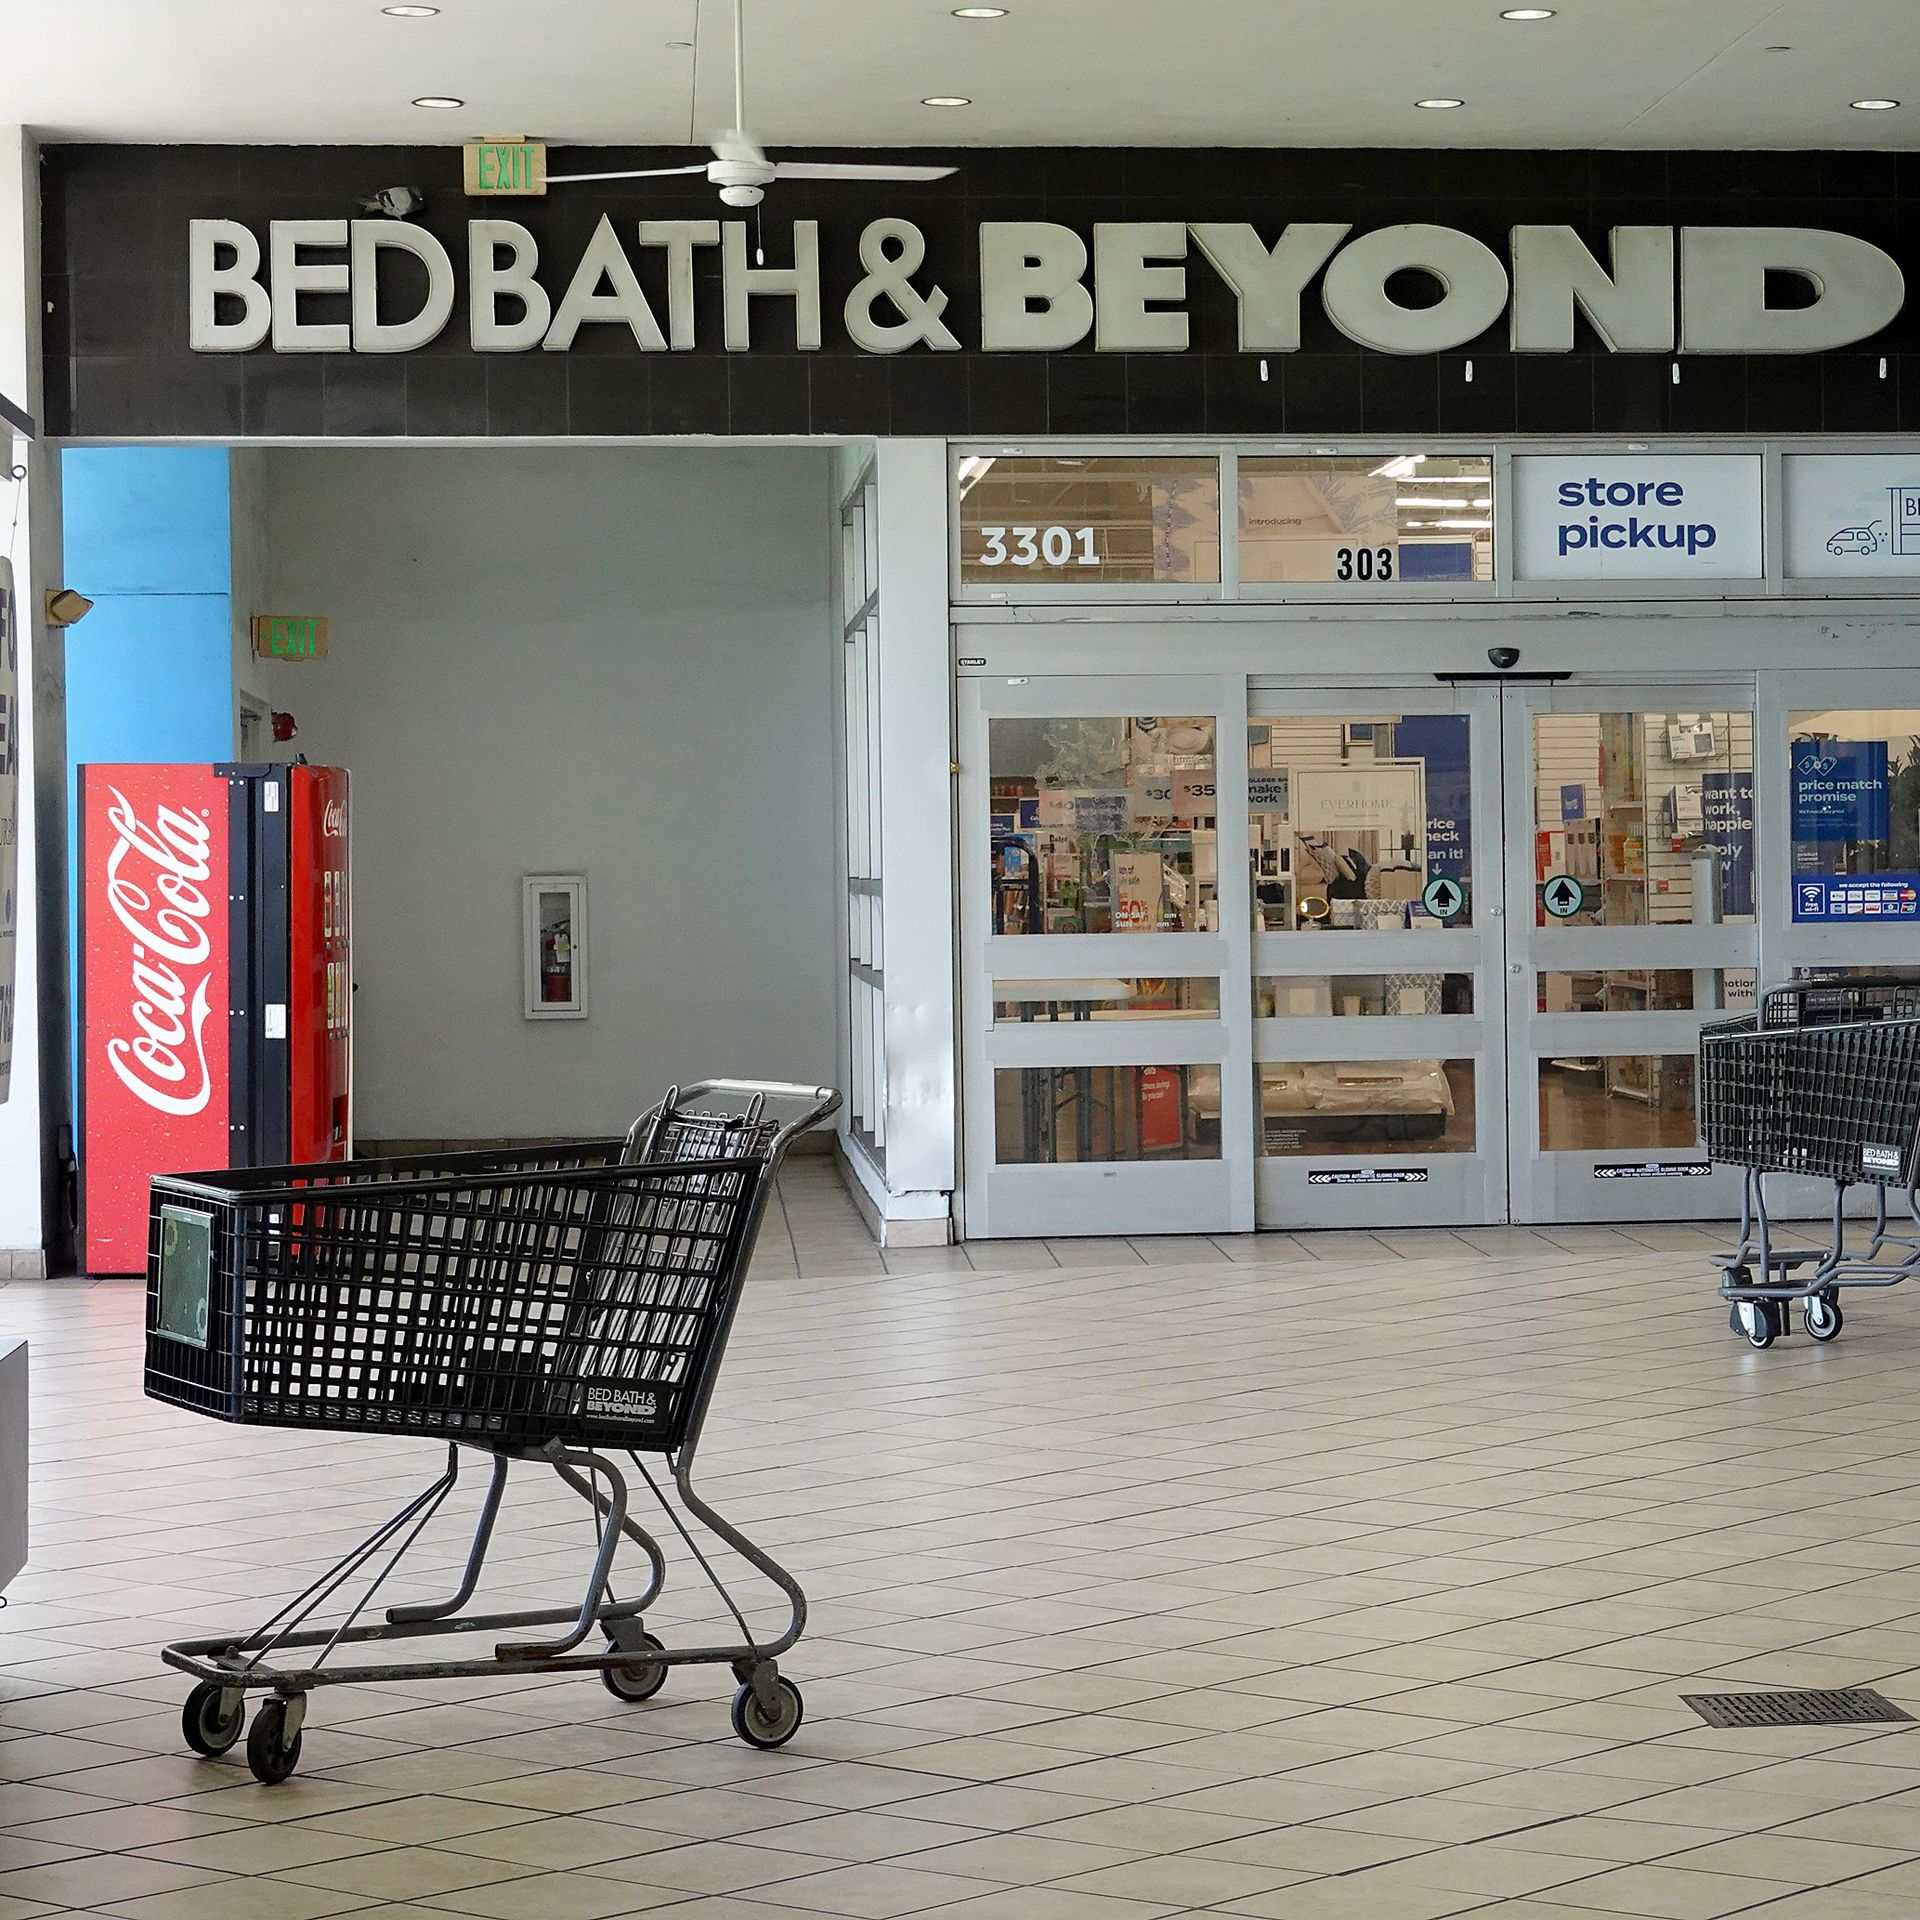 An empty shopping cart sits in front of retailer Bed Bath & Beyond's store entrance.